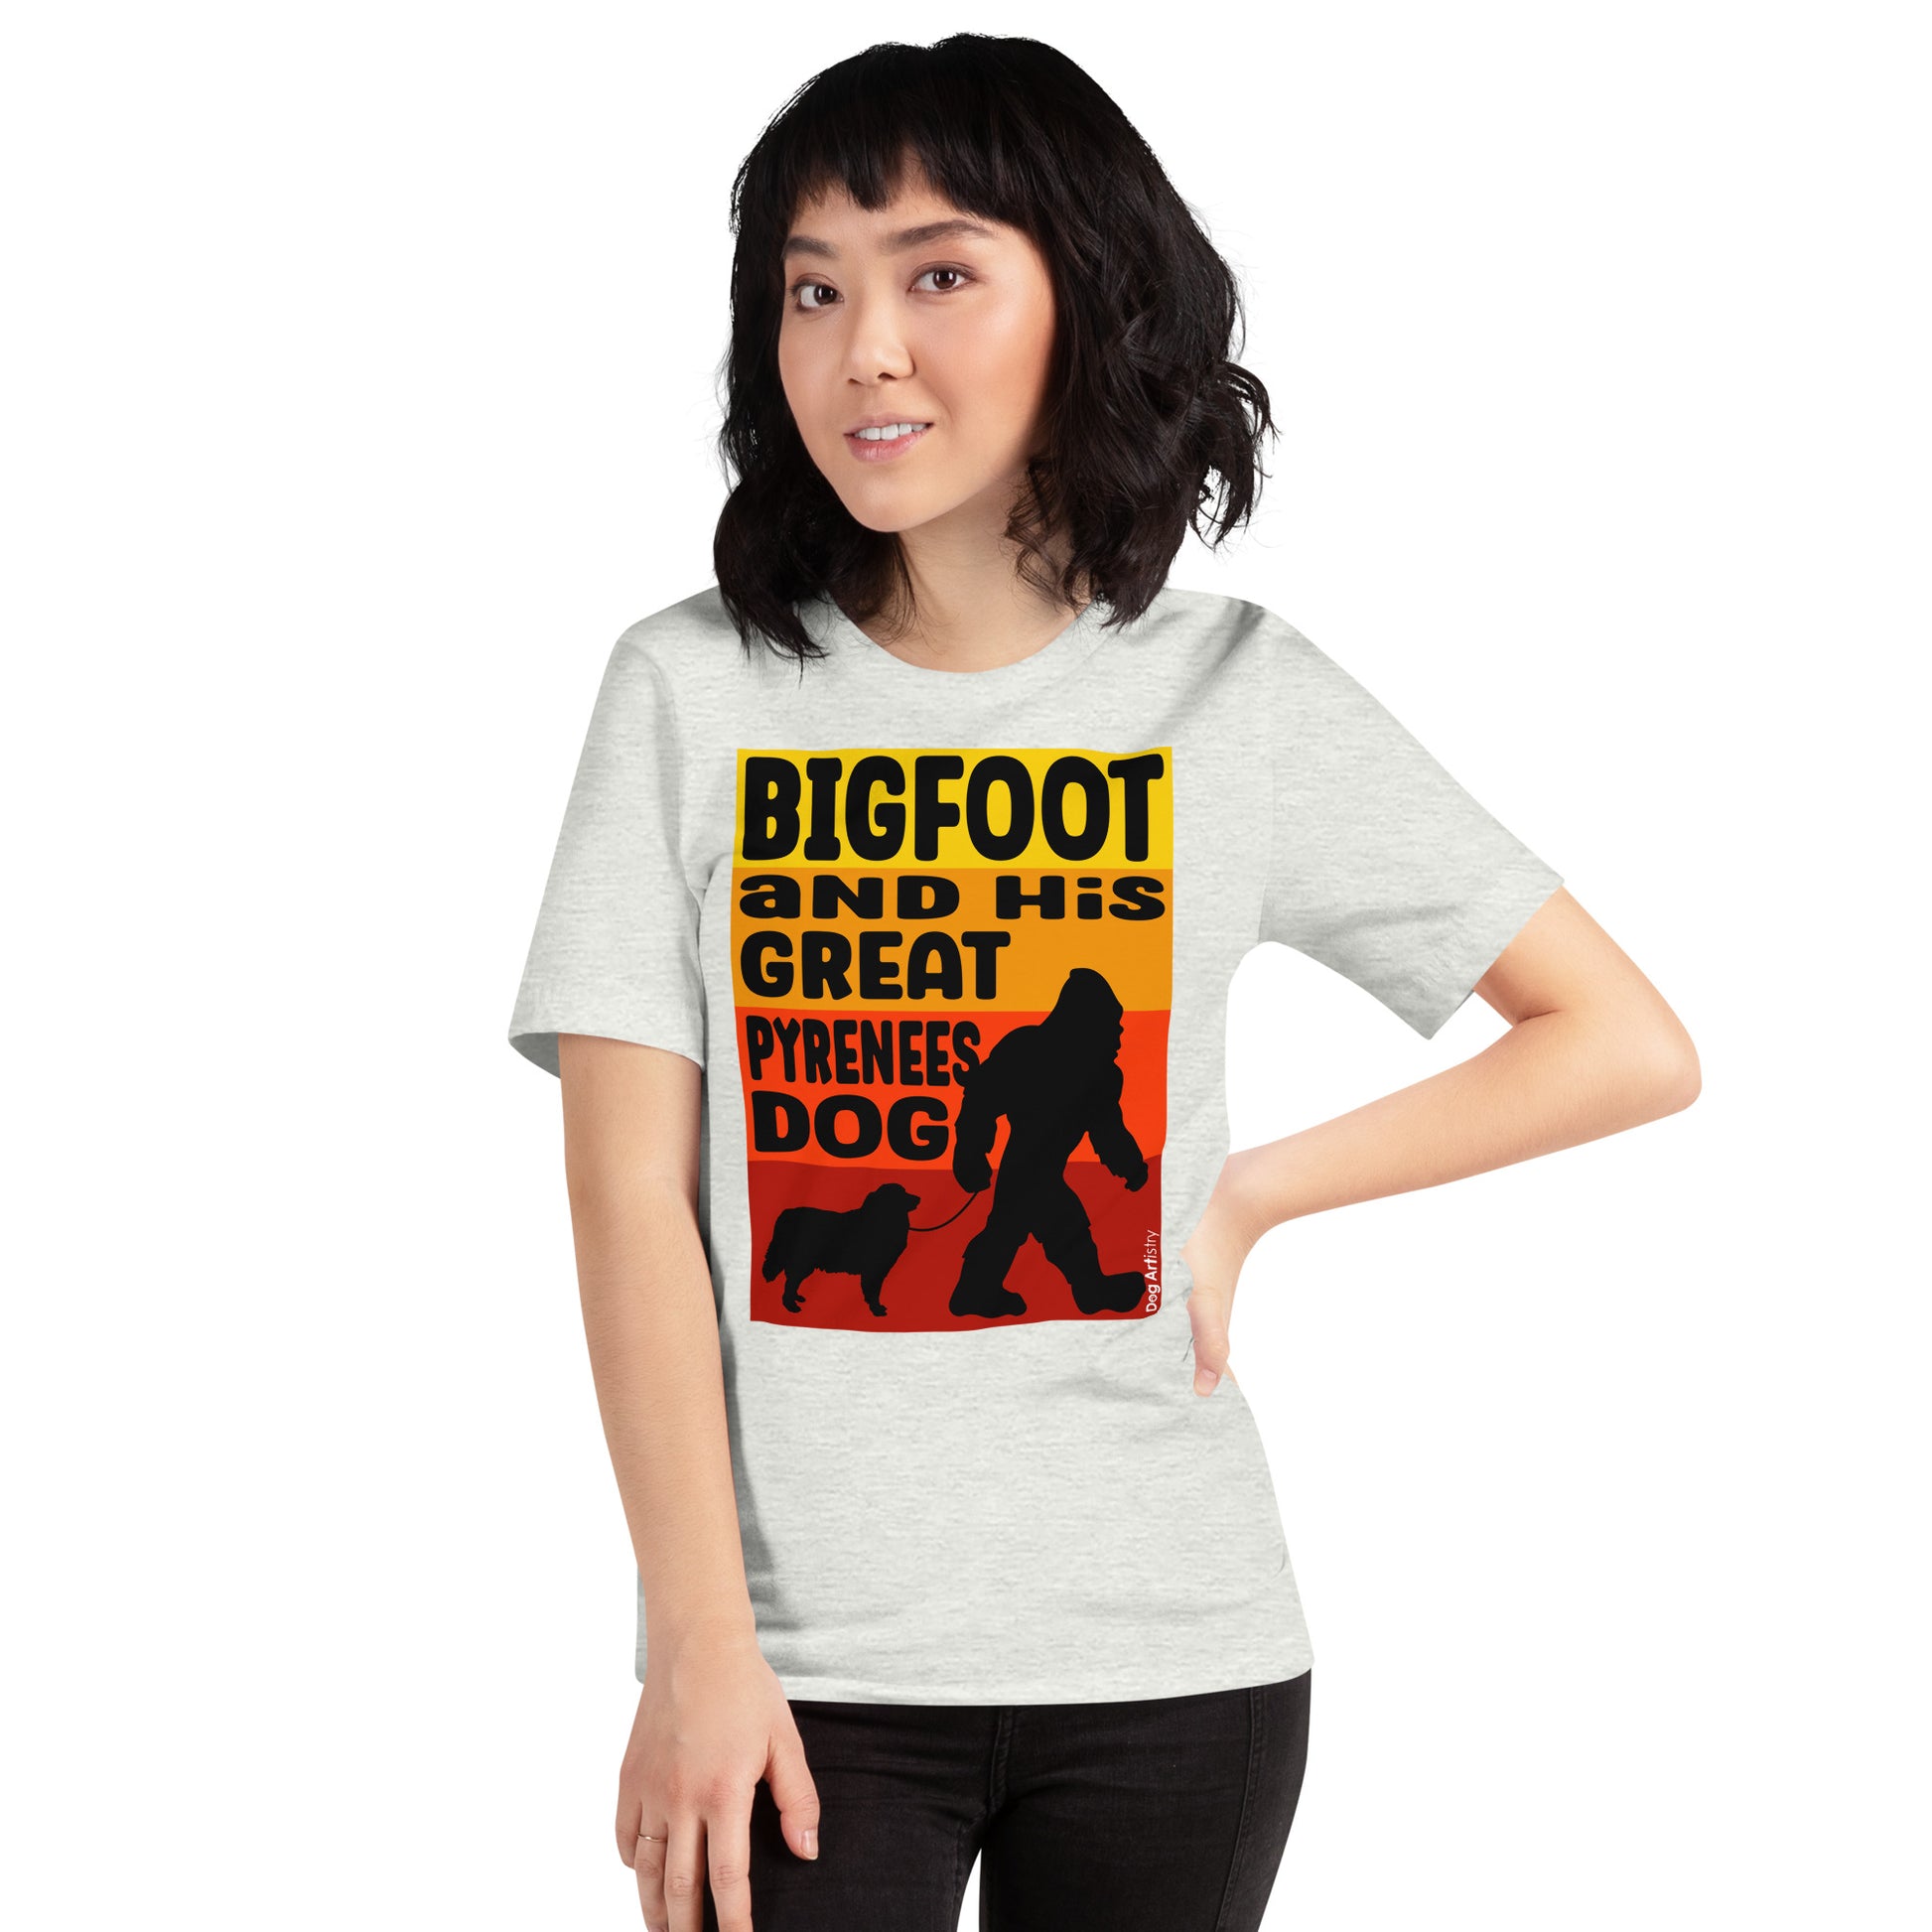 Bigfoot and his Great Pyrenees unisex ash t-shirt by Dog Artistry.